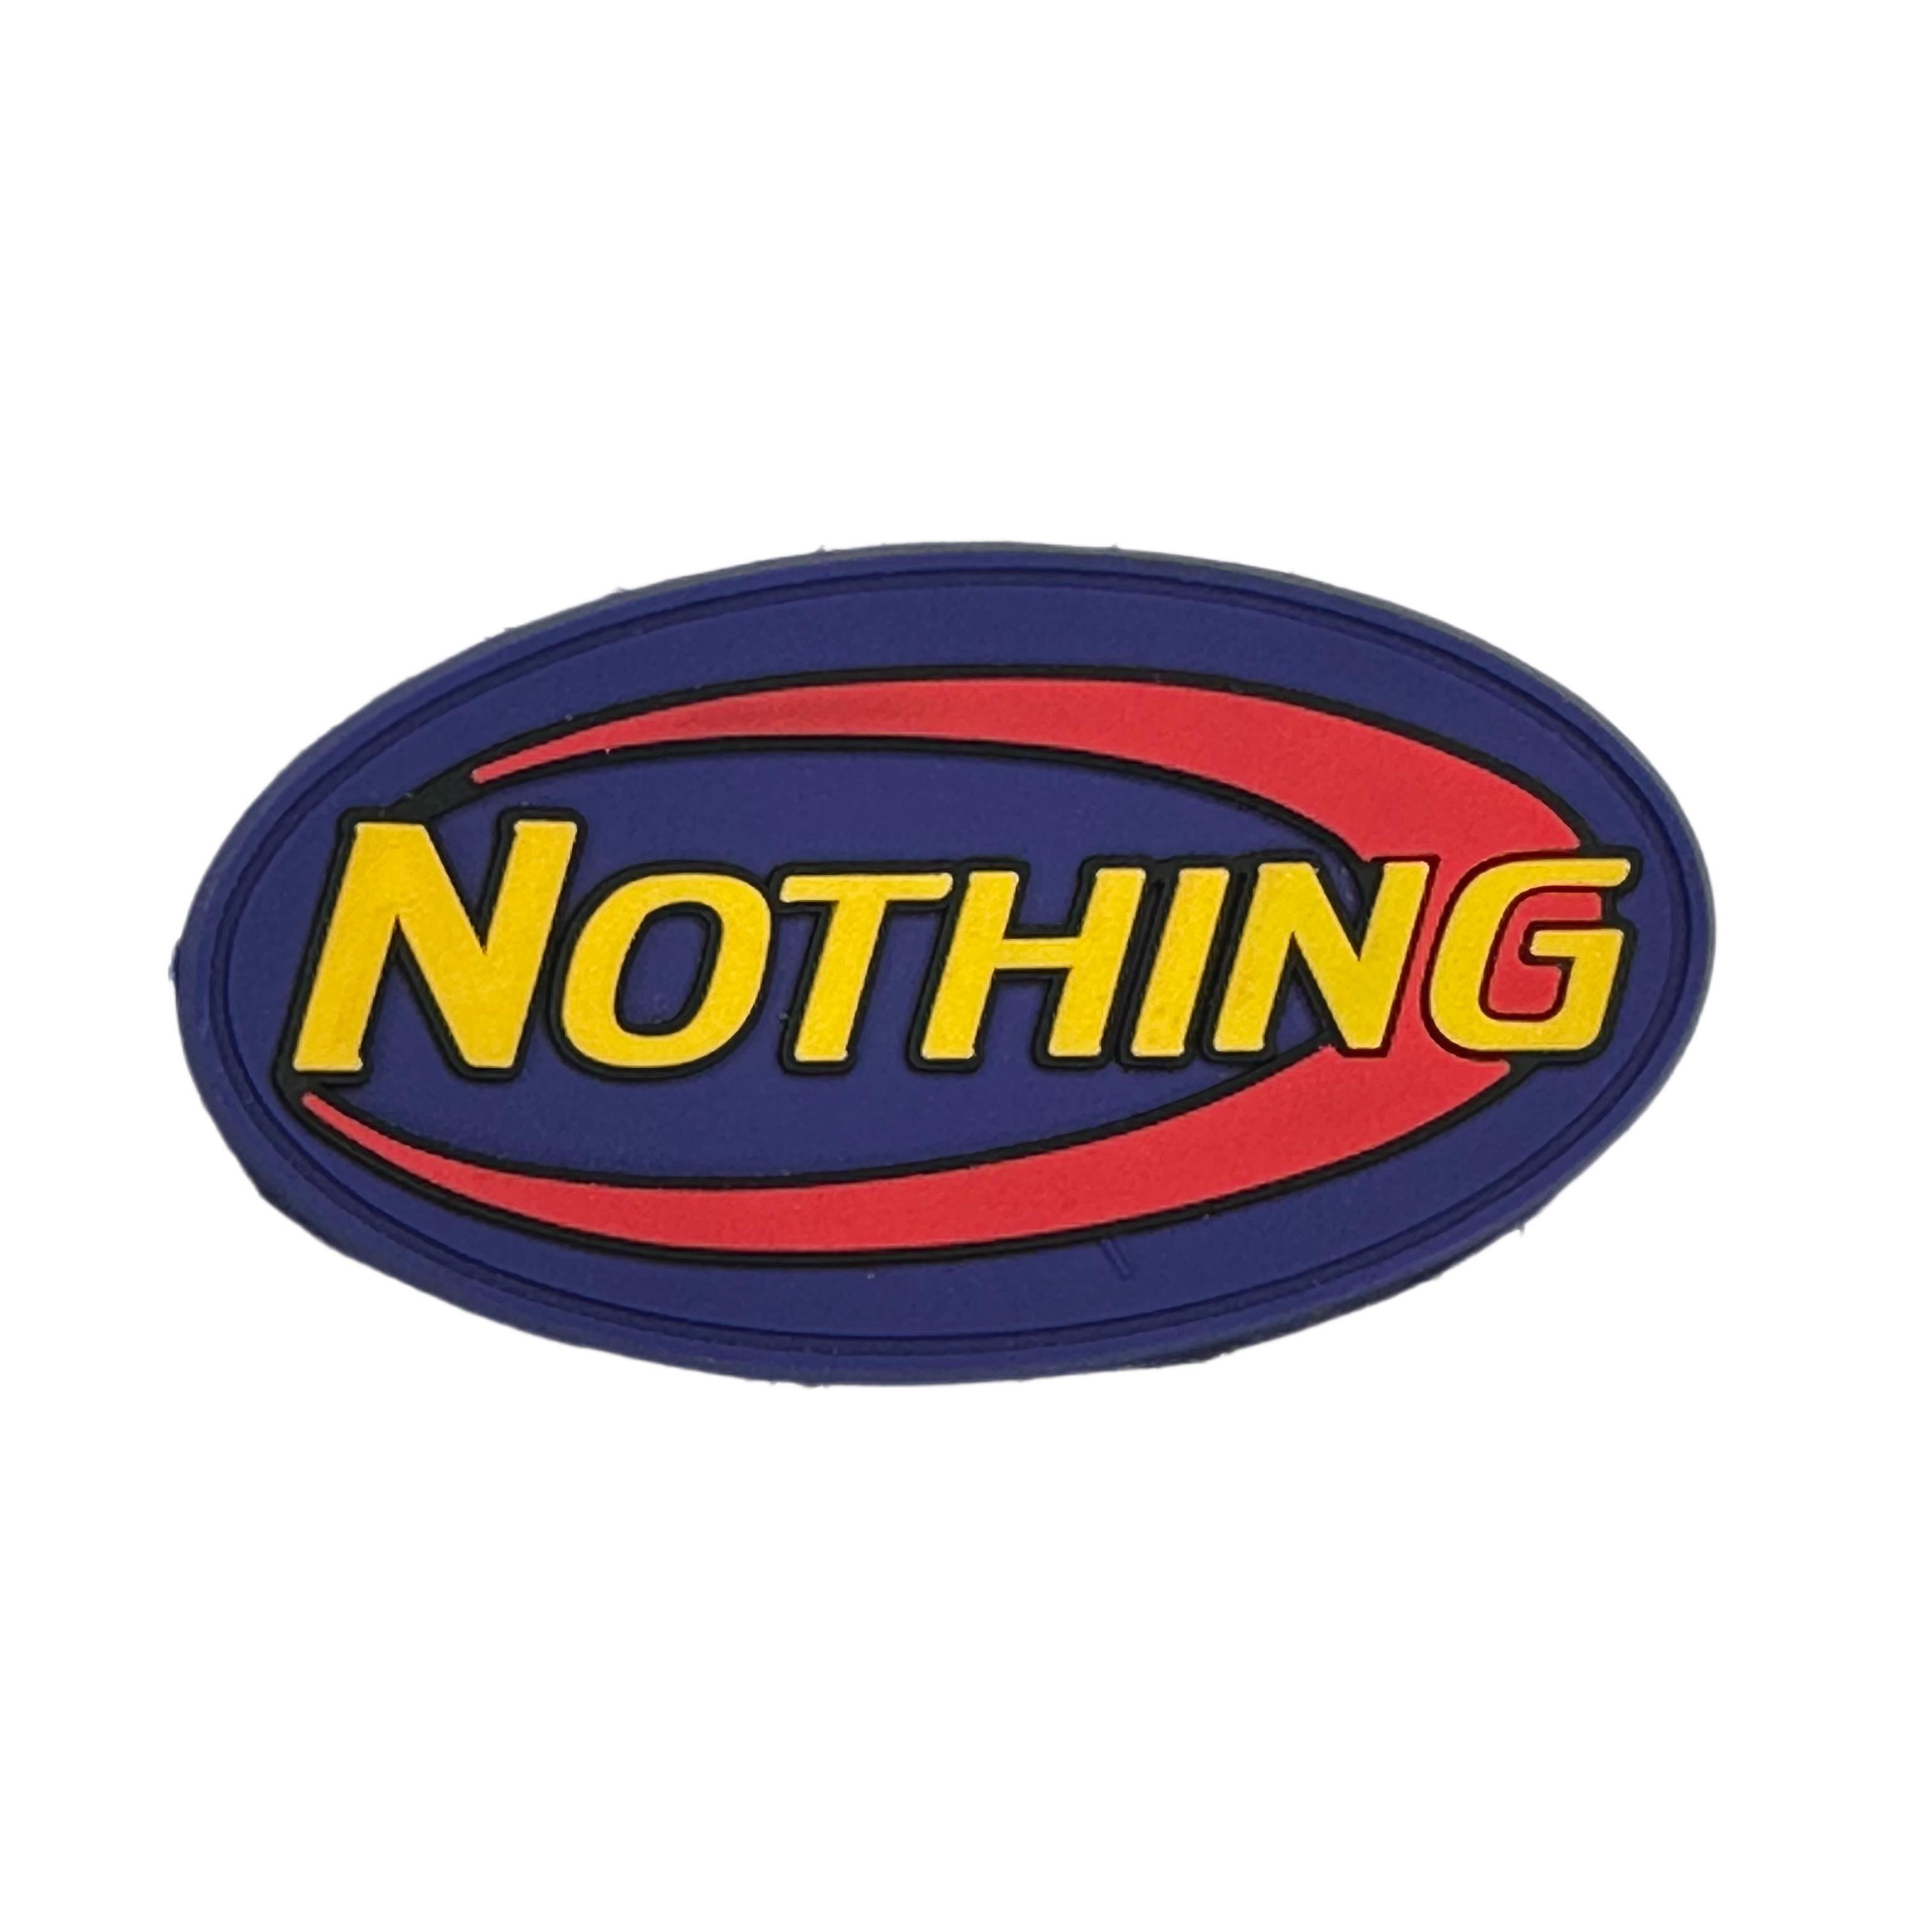 Nothing - Nerf Logo Inspired Rubber Velcro Morale Patch